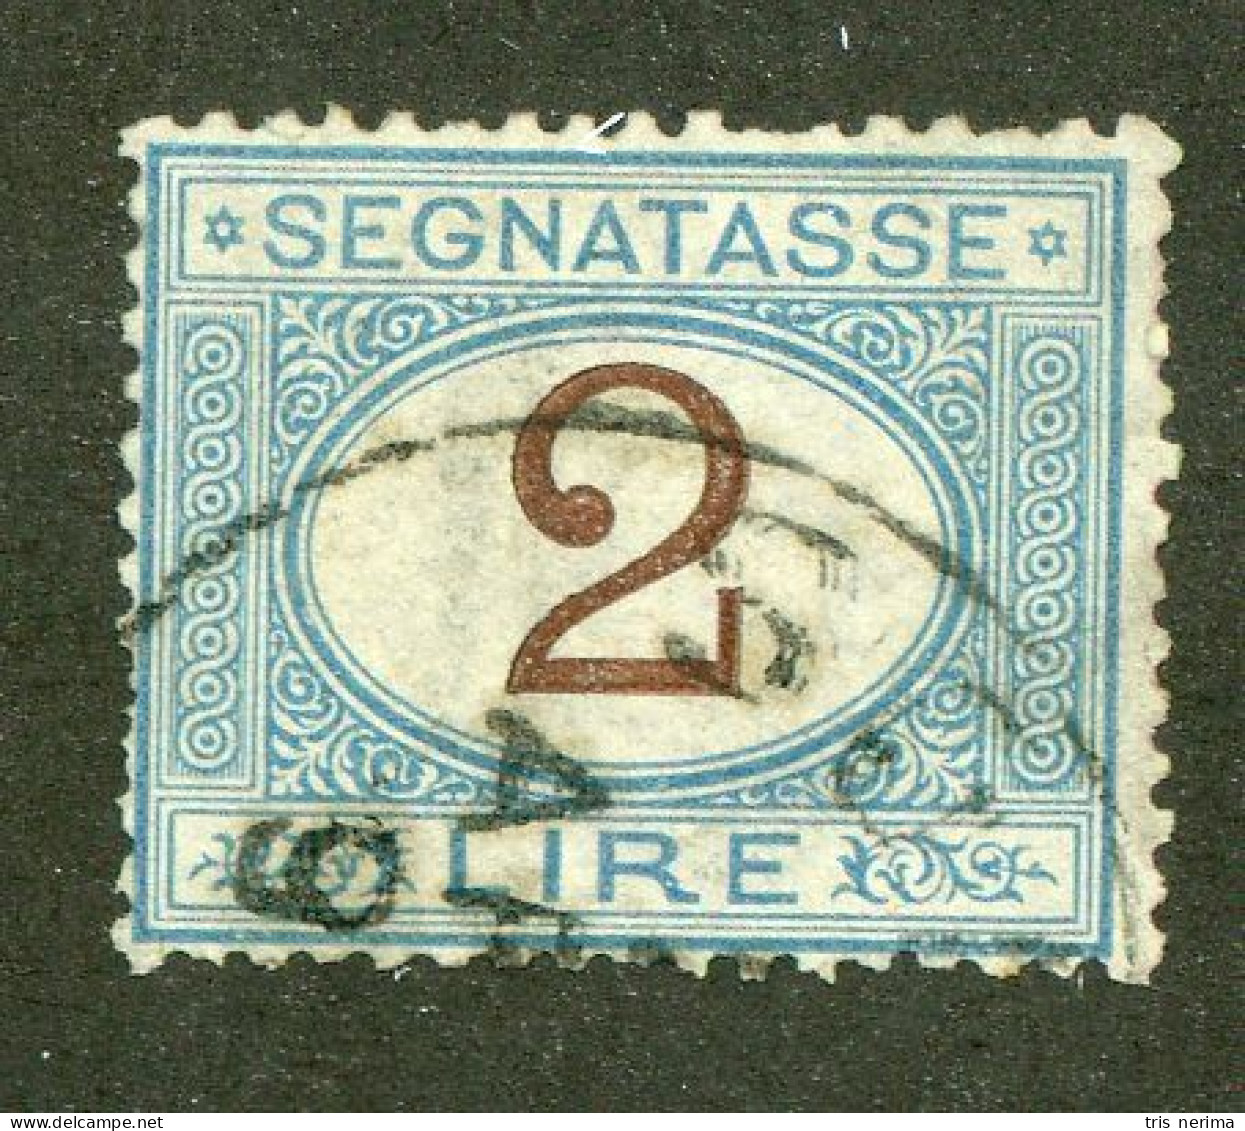 1004 Italy 1870 Scott #J15 Used (Lower Bids 20% Off) - Postage Due